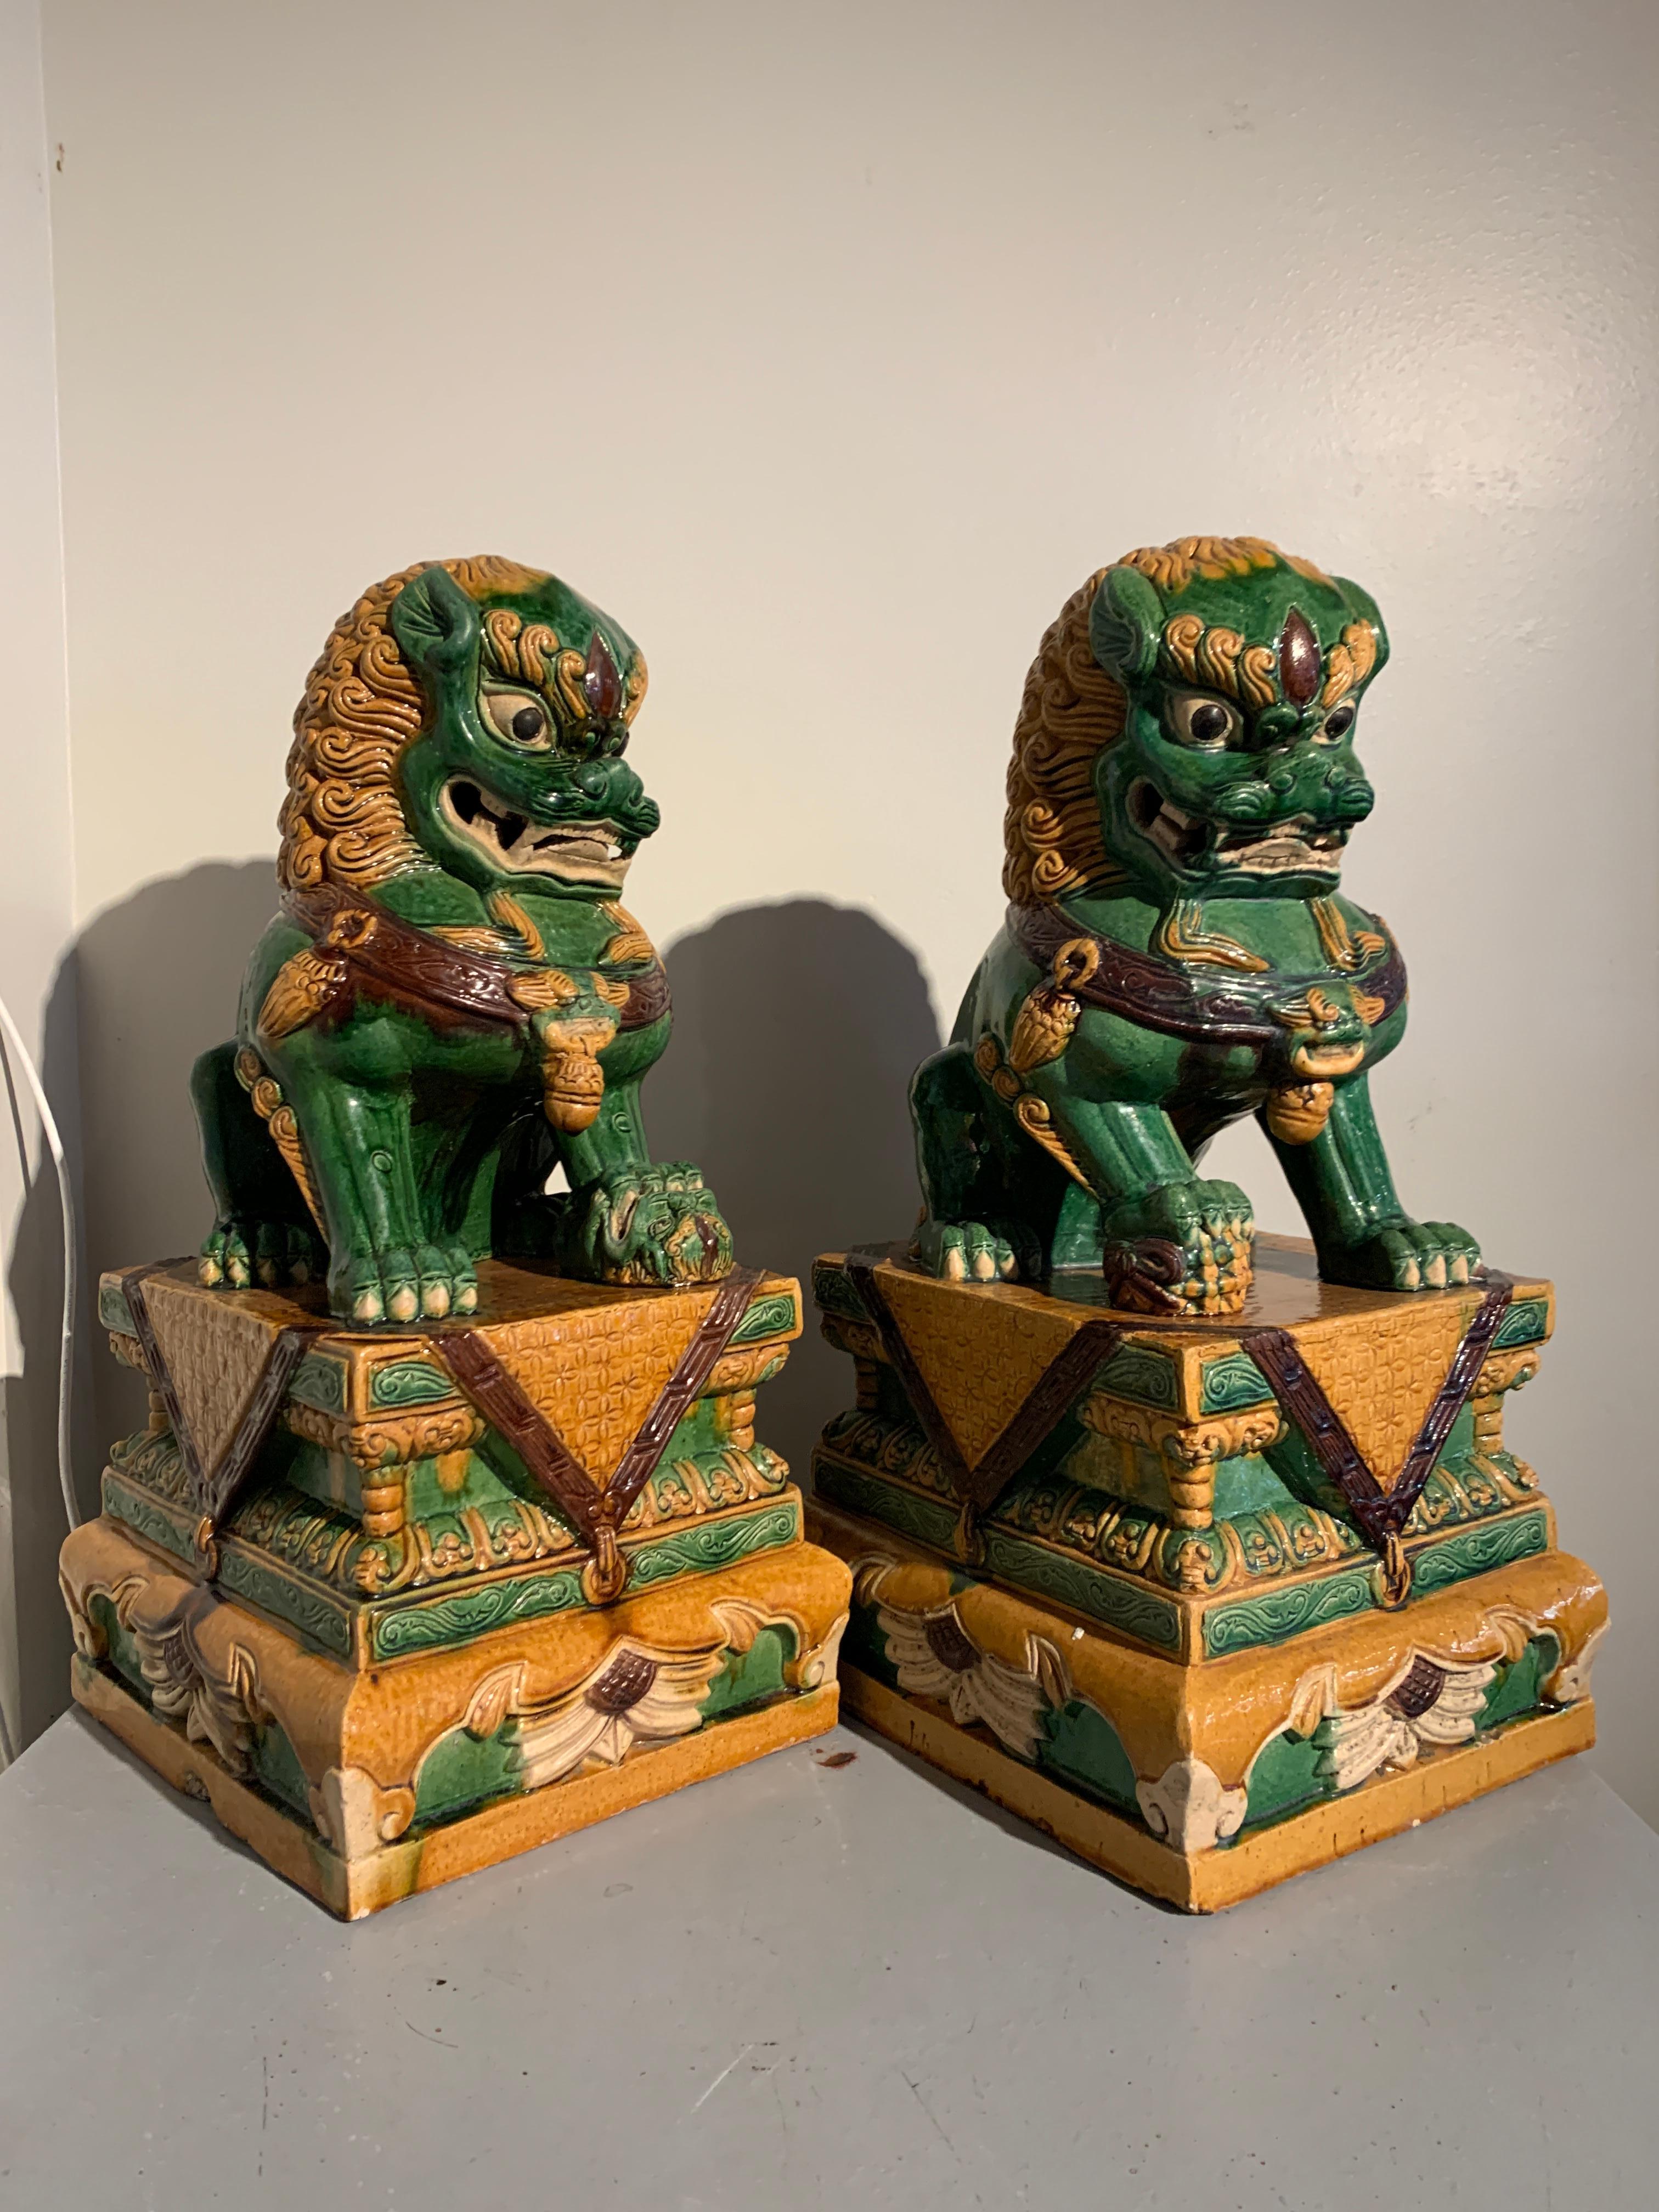 A fun and ferocious pair of Chinese sancai glazed guardian lions, mid 20th century, circa 1960s, China.

The fabulous foo lions are crafted in stoneware and glazed all over in a stunning sancai glaze of predominantly green and contrasting yellow,